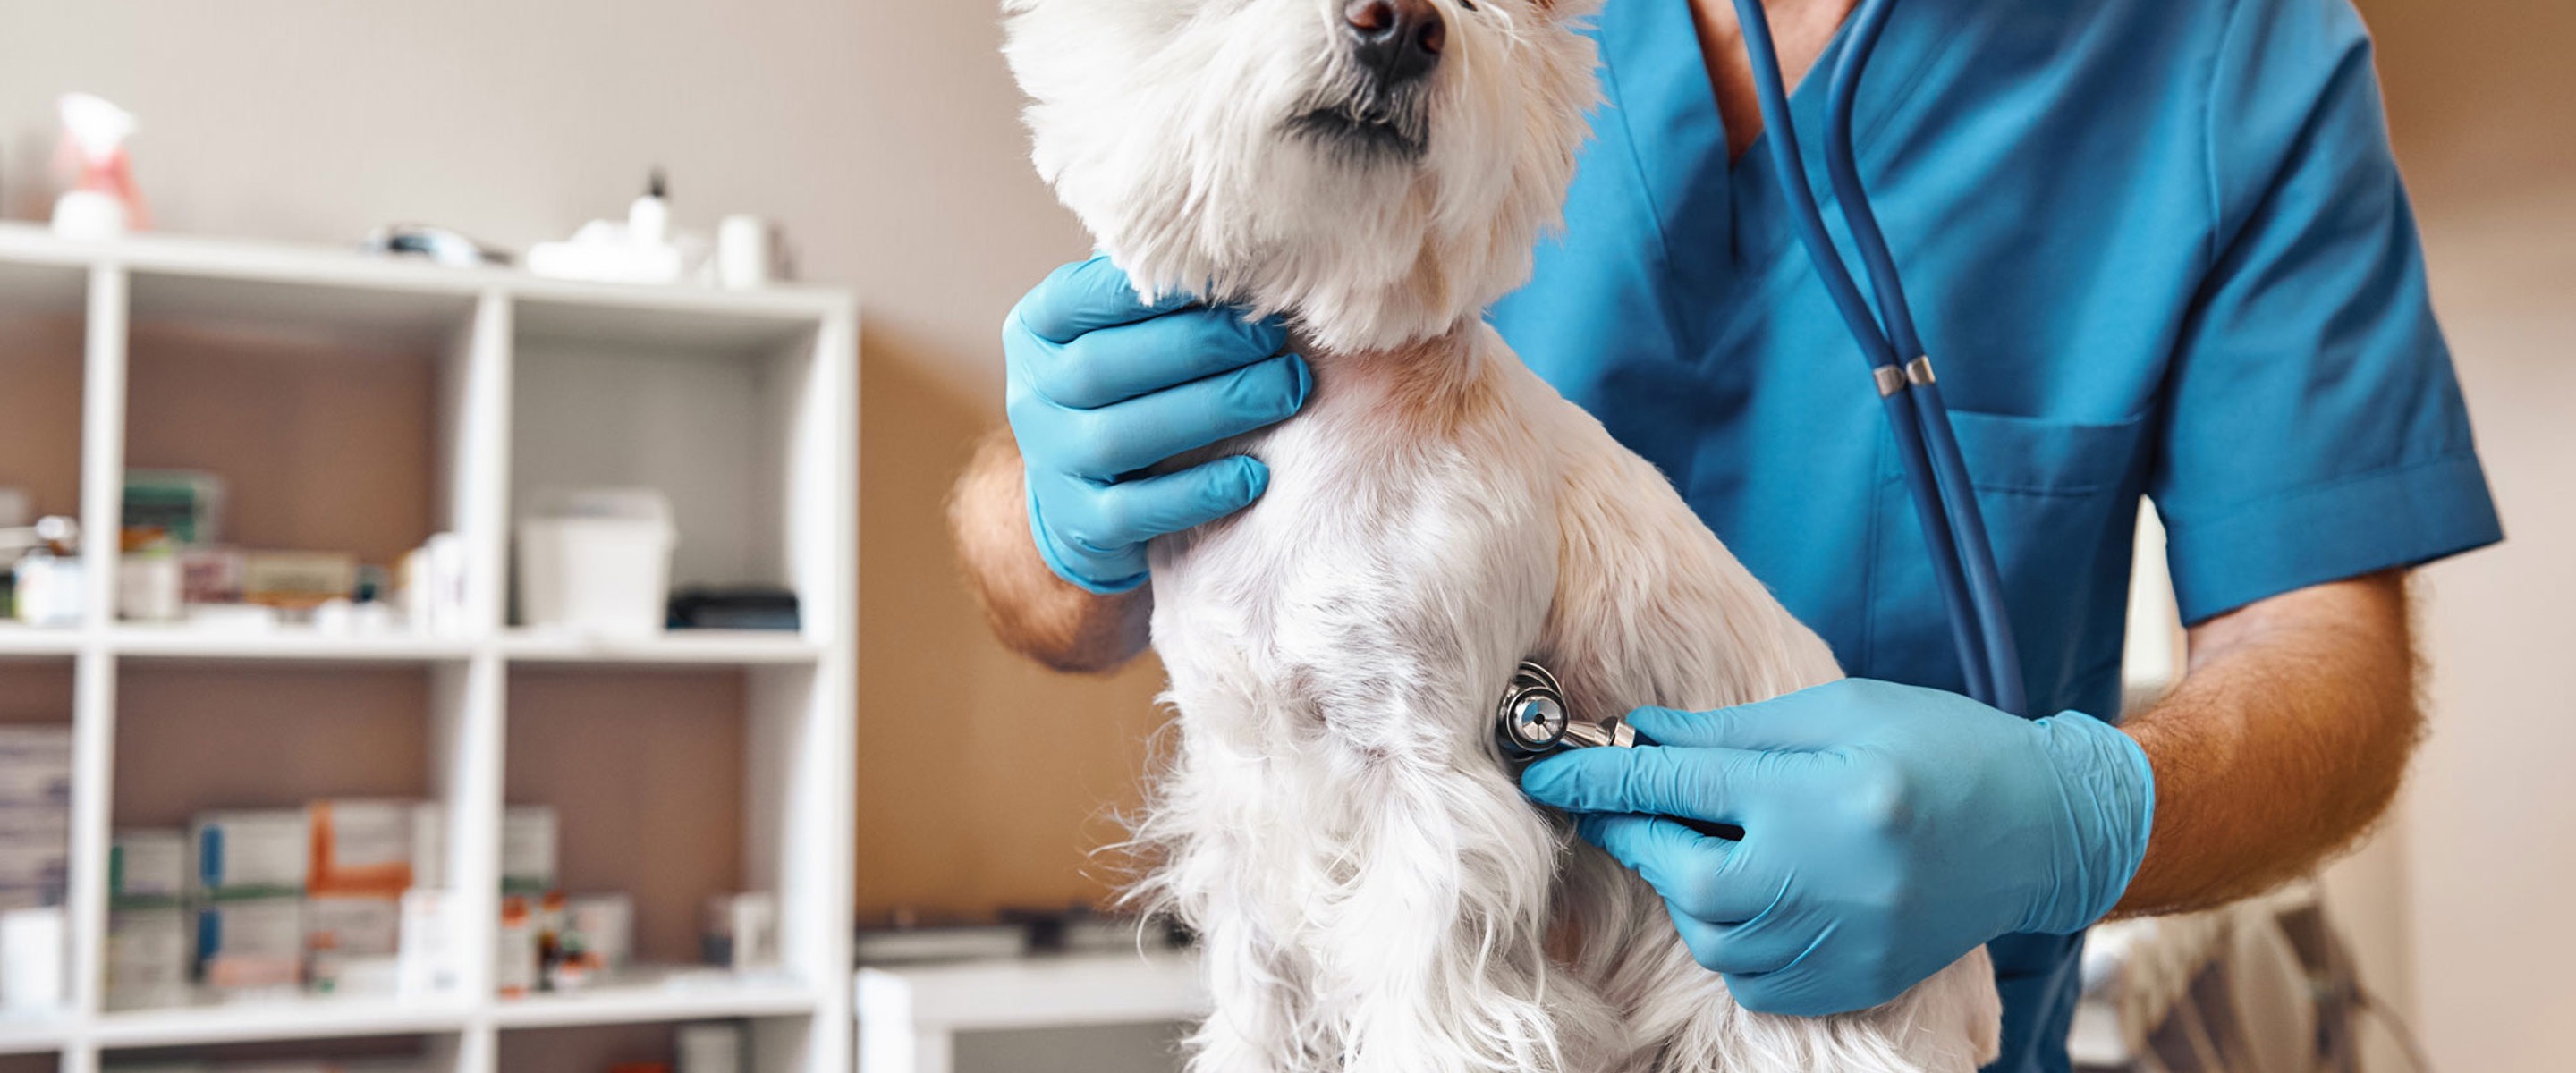 A little dog having a check up with a vet